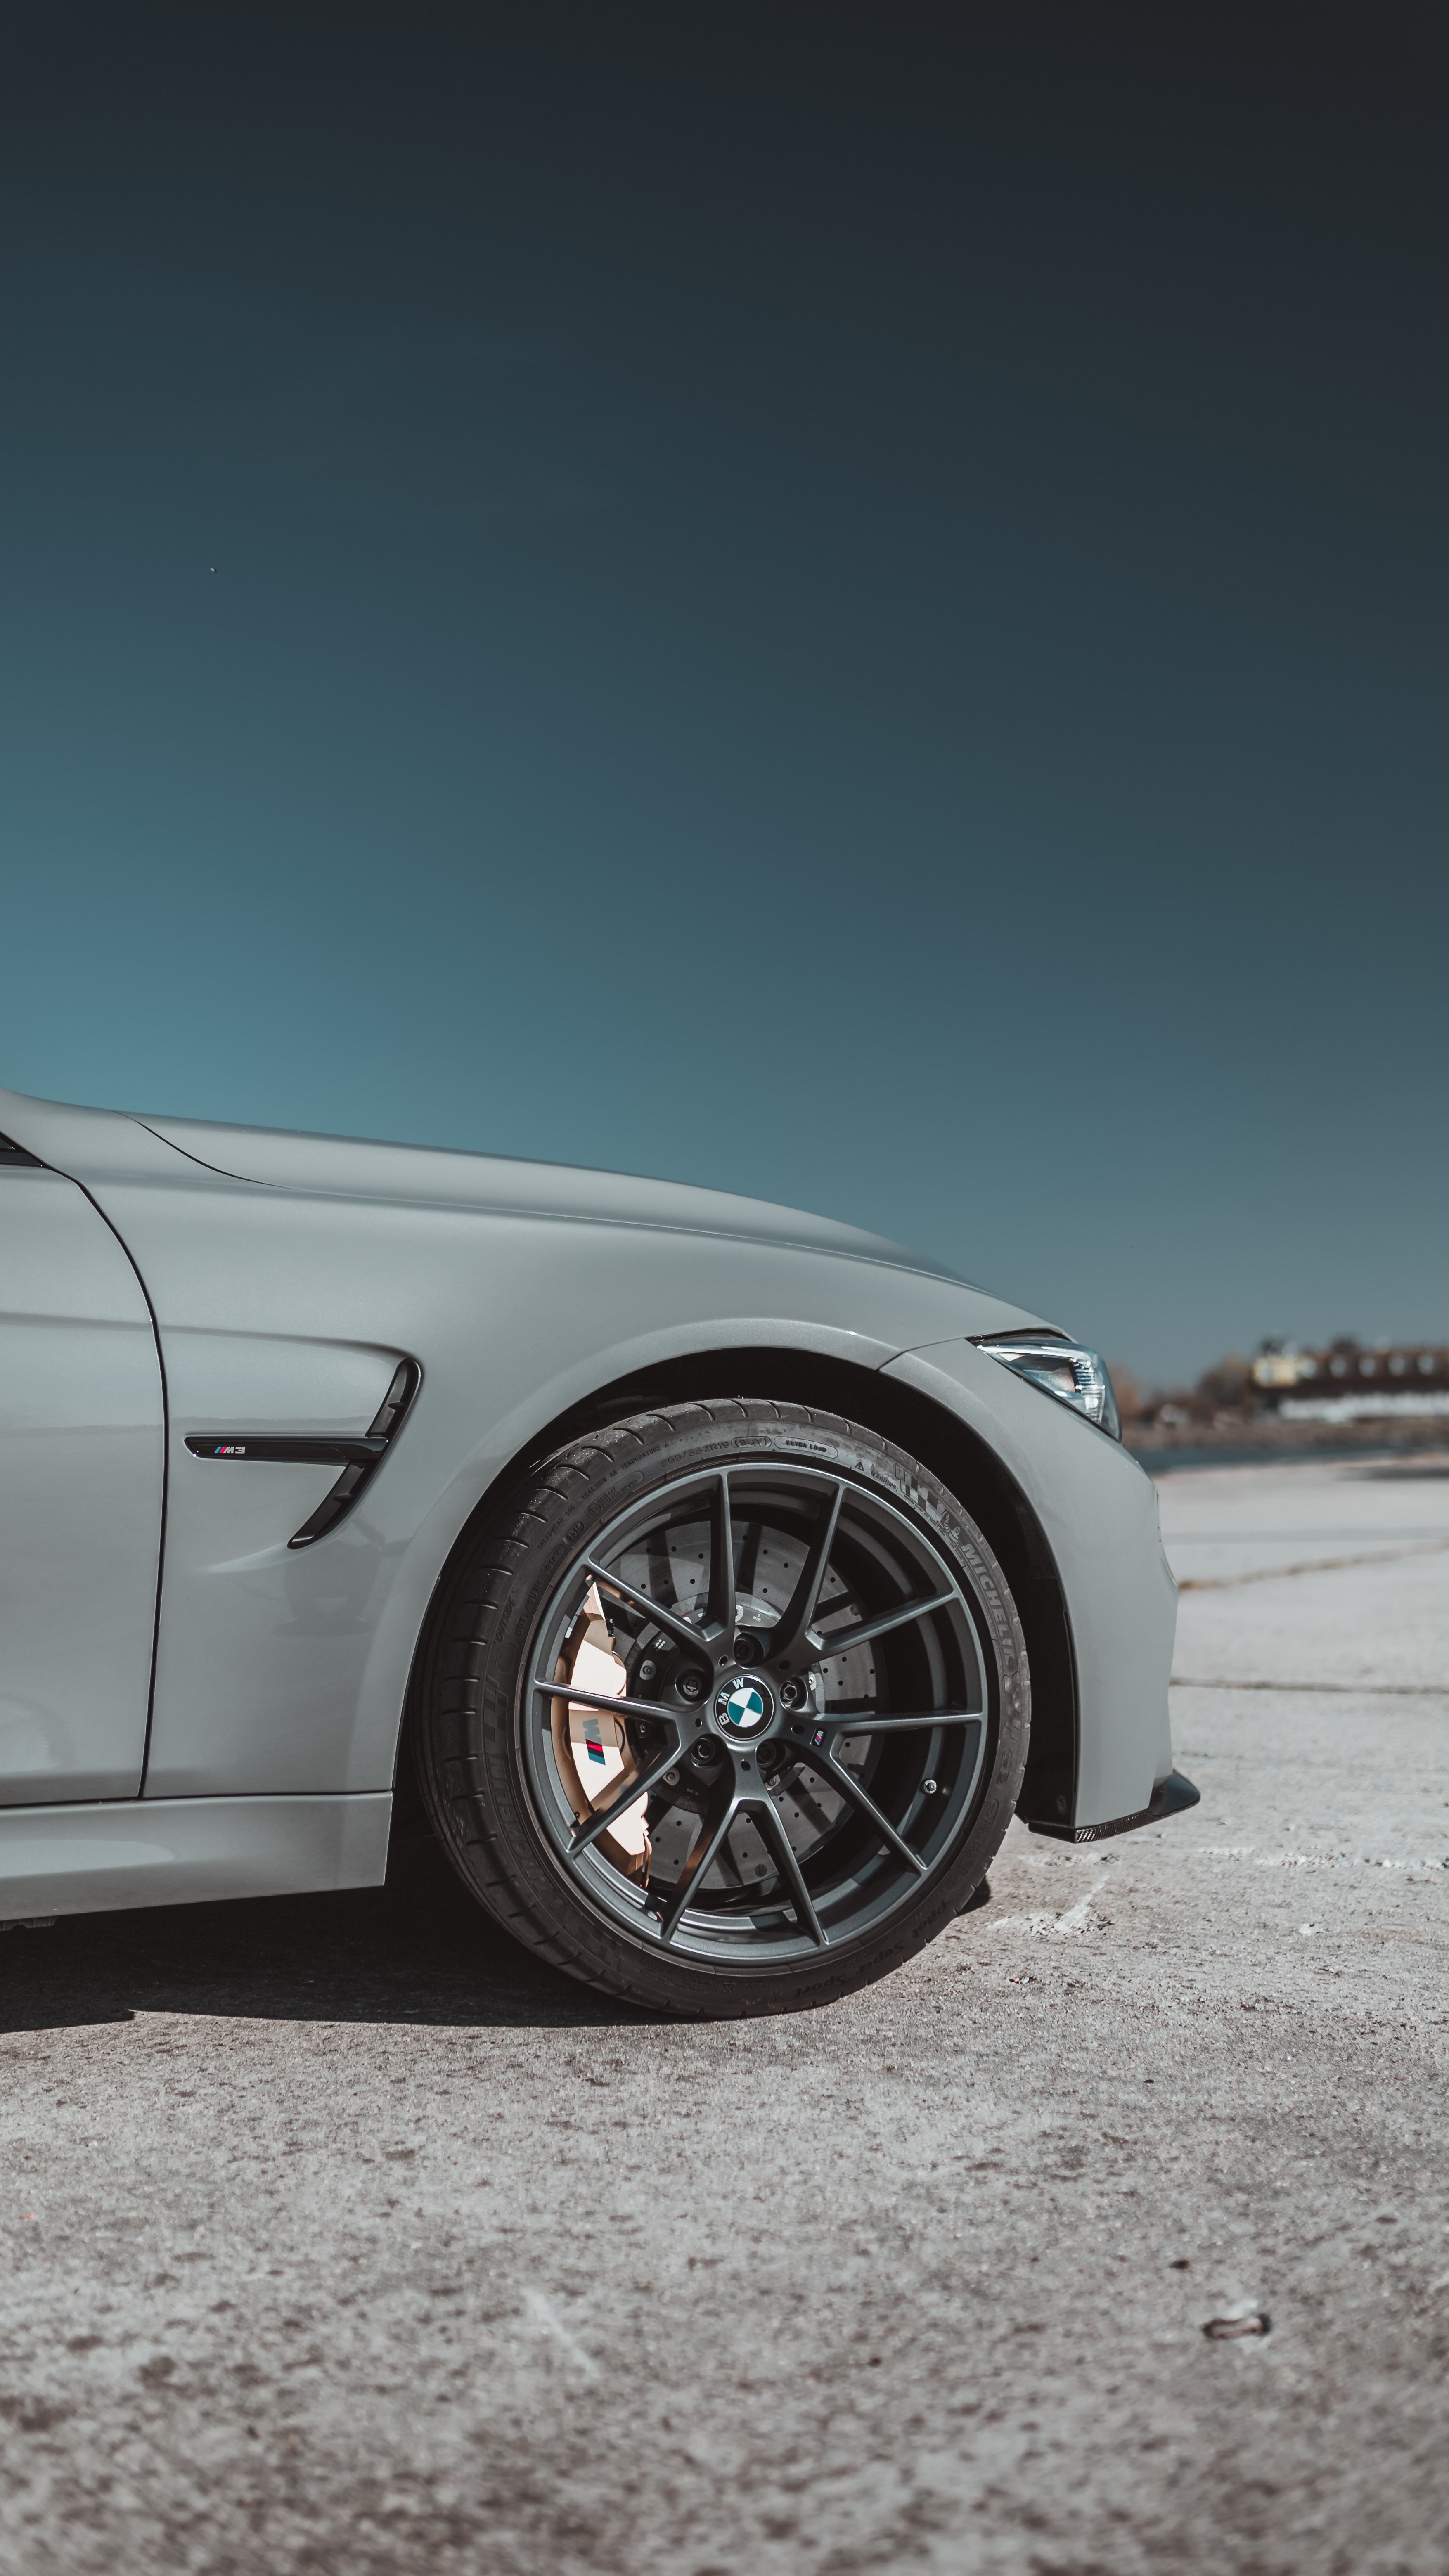 Best Bmw Background for mobile